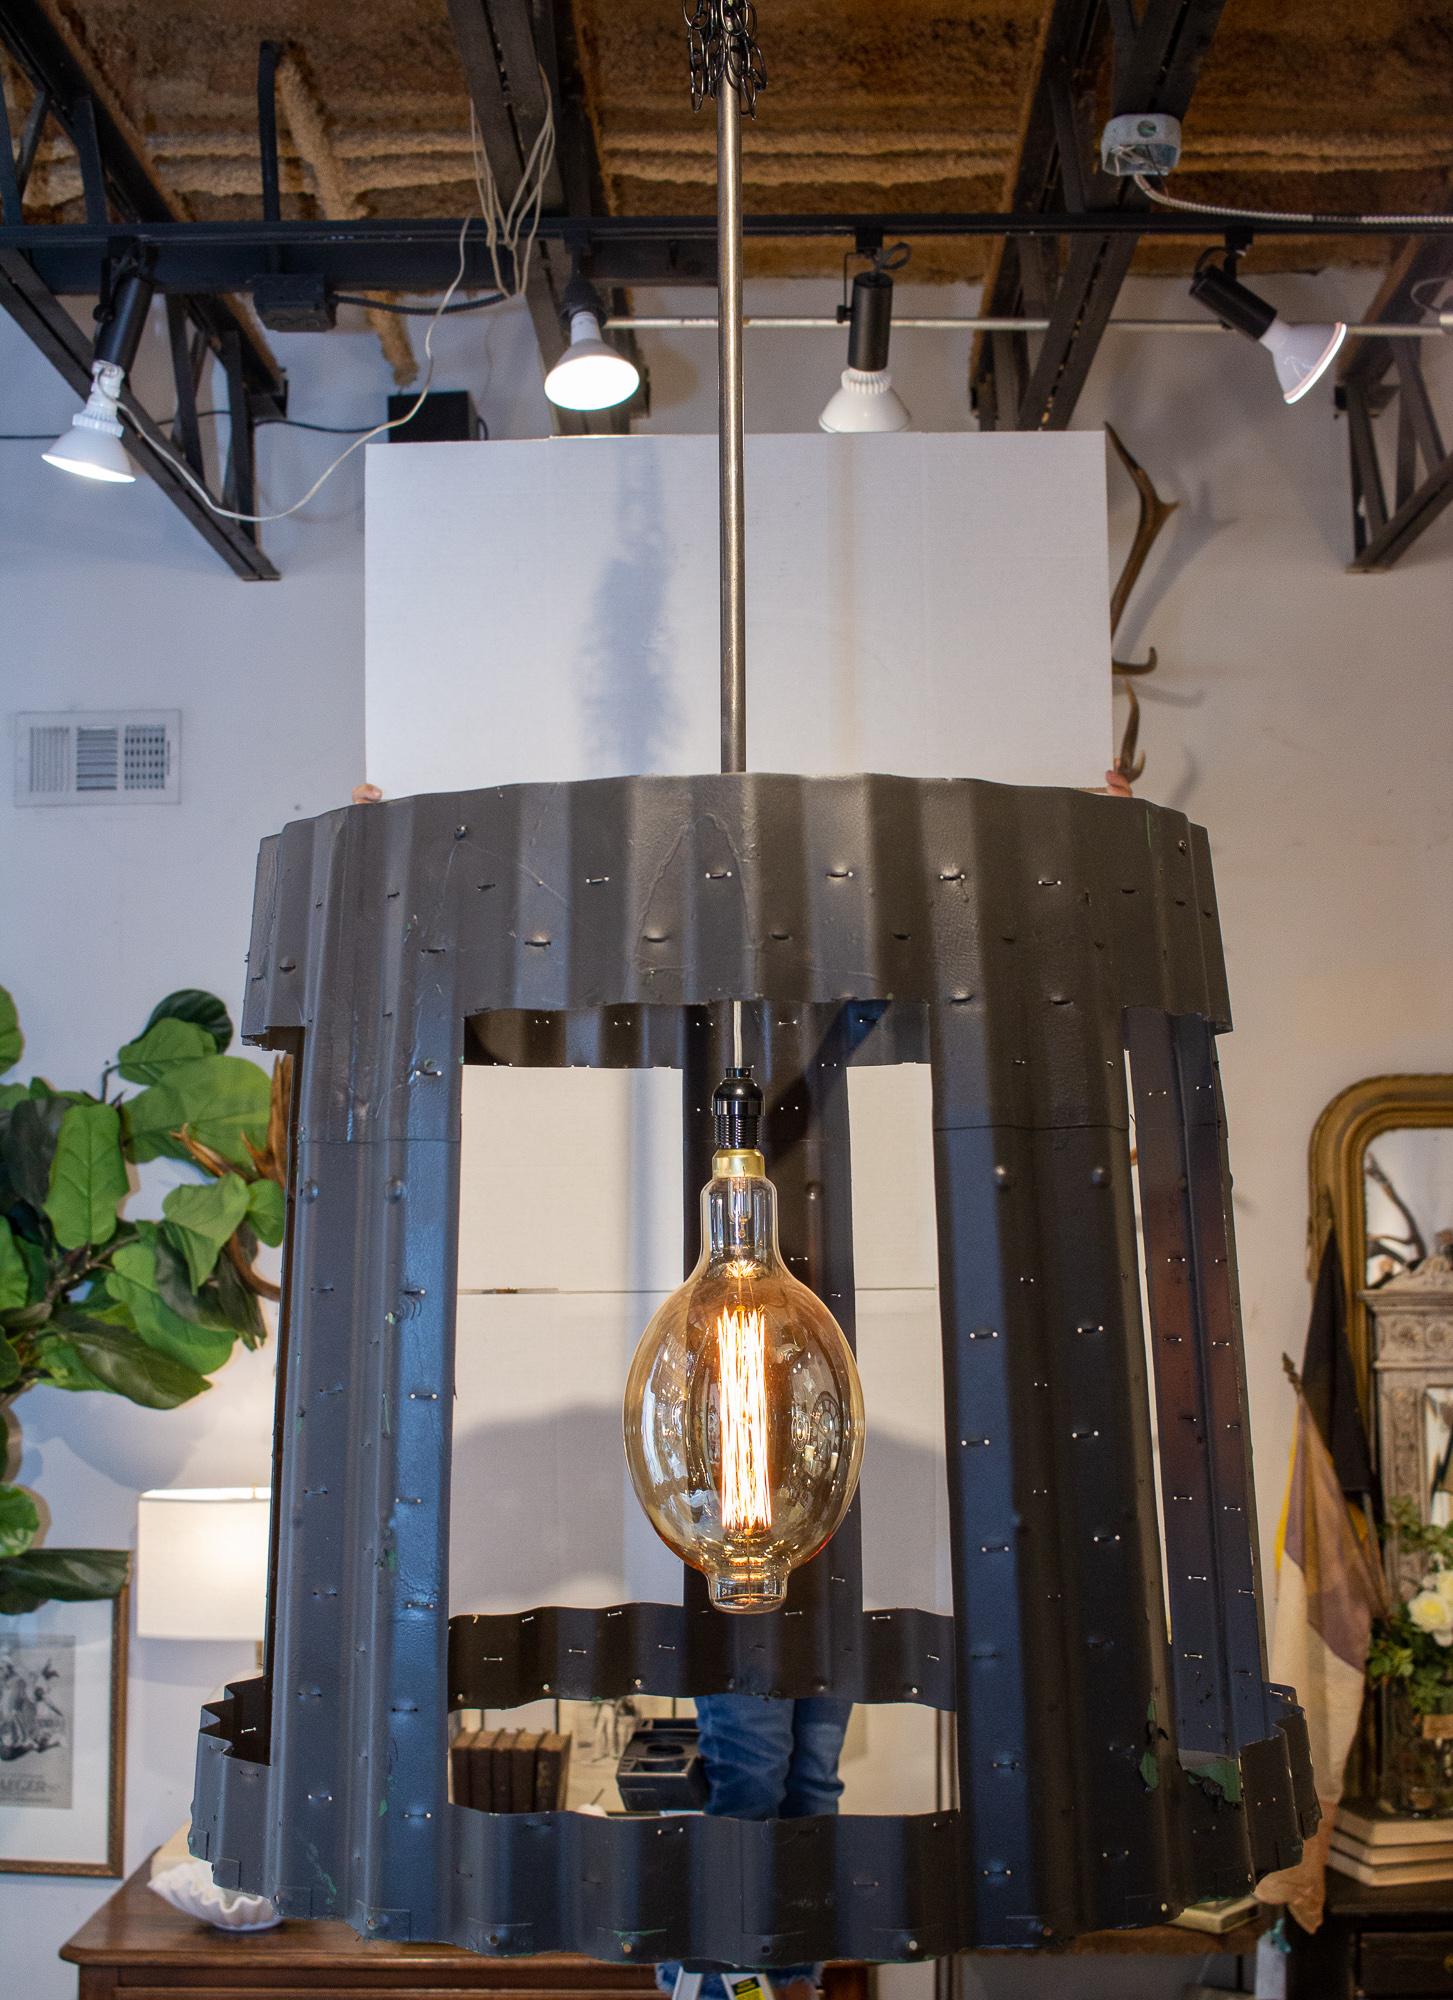 These unique statement chandelier has been crafted using vintage aircraft parts and modified by adding openings to the 